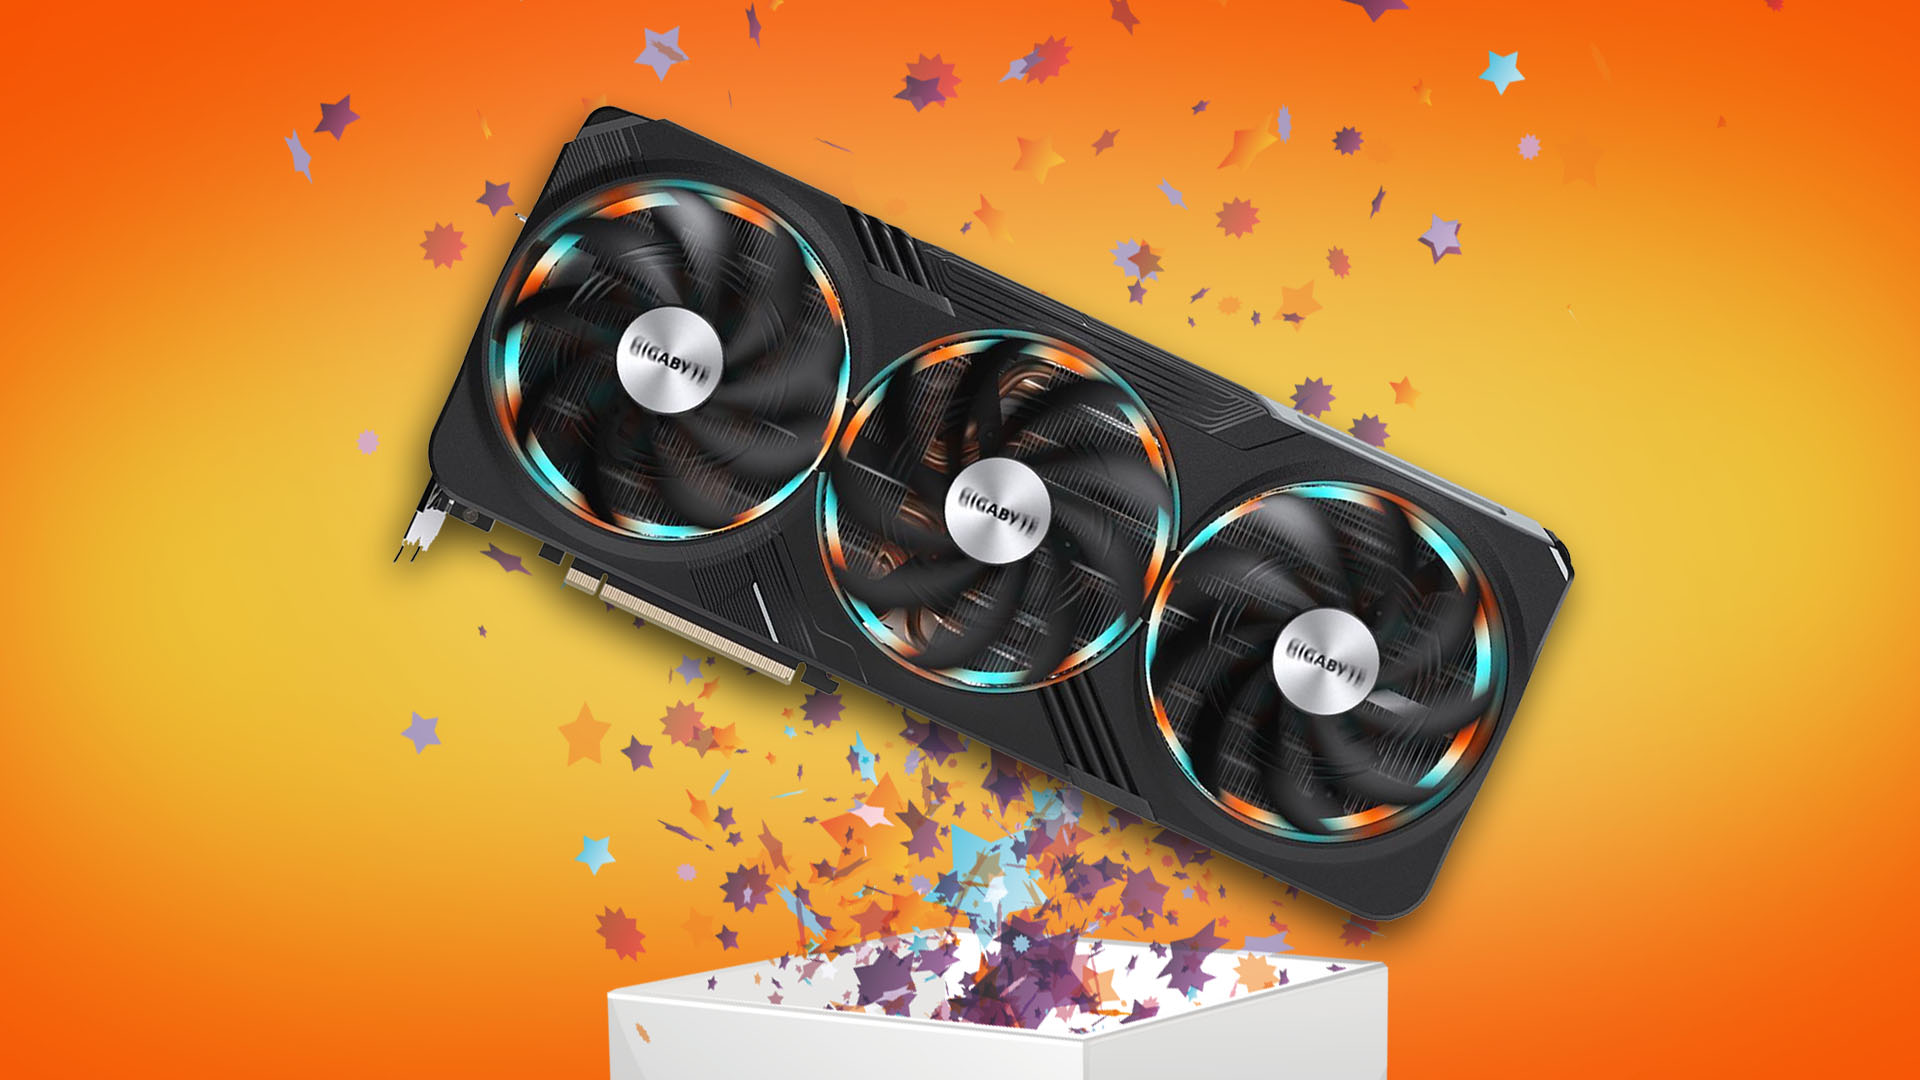 Grab an Nvidia RTX 4090 for the lowest price we've seen in months